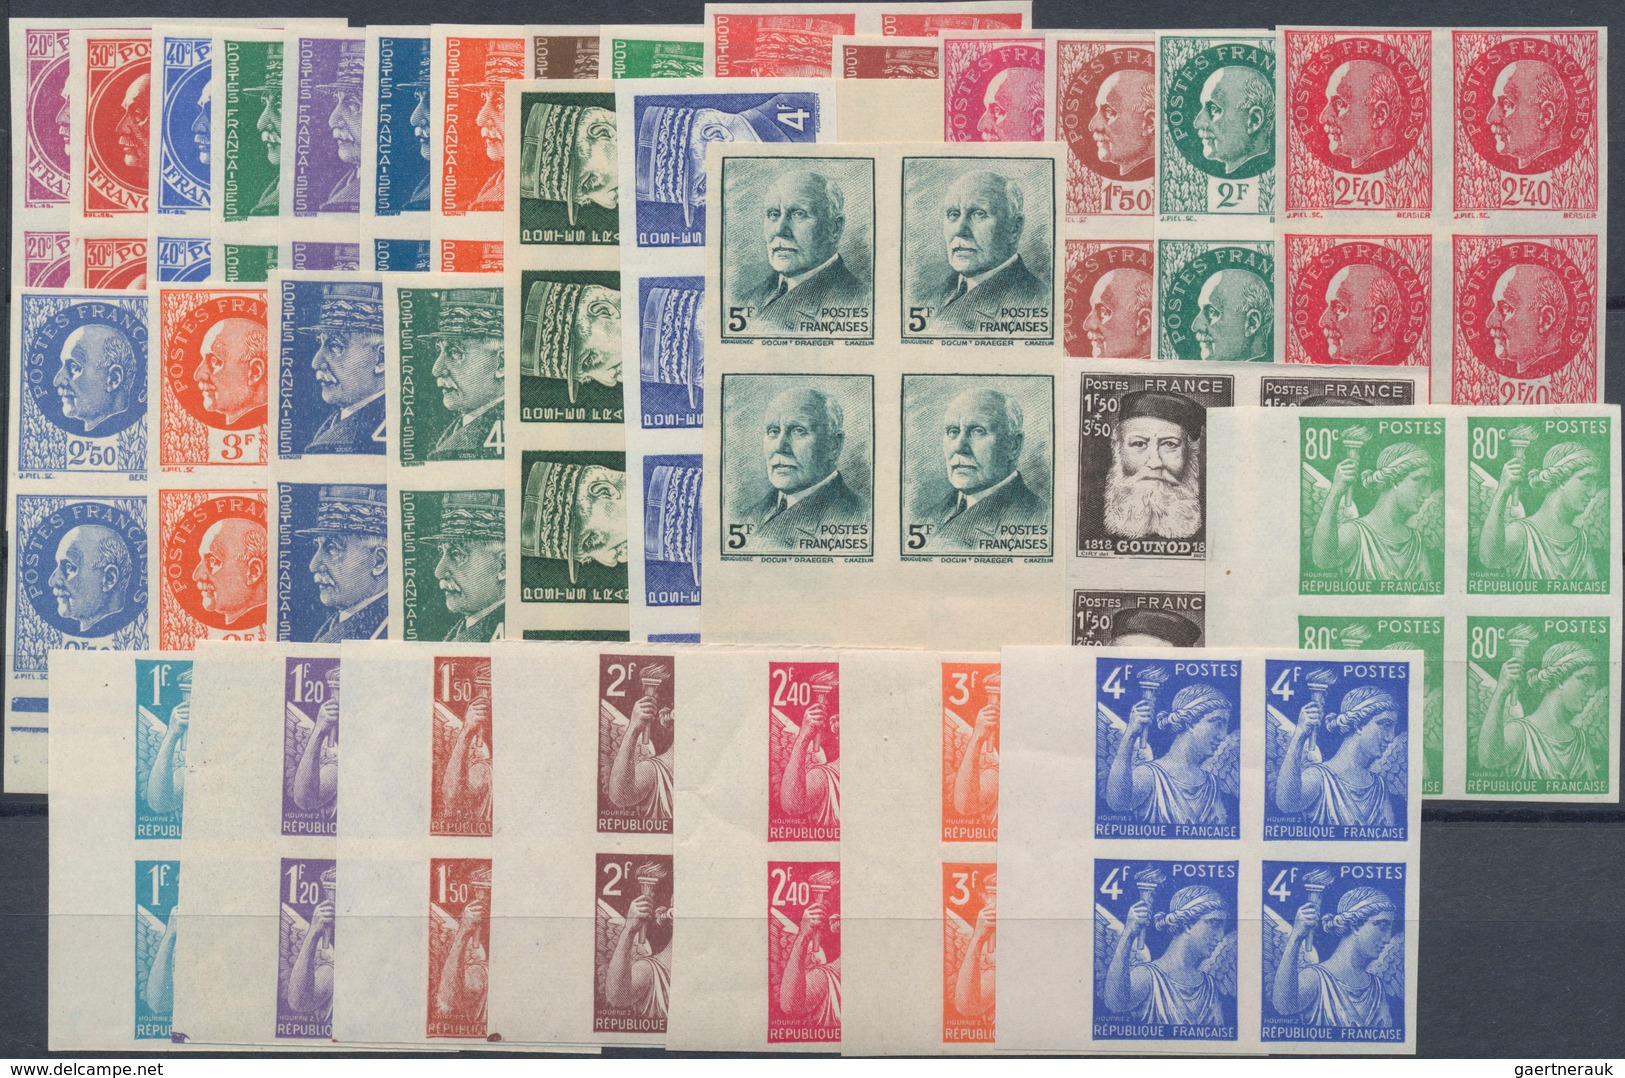 Frankreich: 1941/1974, IMPERFORATE ISSUES, MNH Collection Of Imperforate Blocks Of Four, Well Sorted - Collections